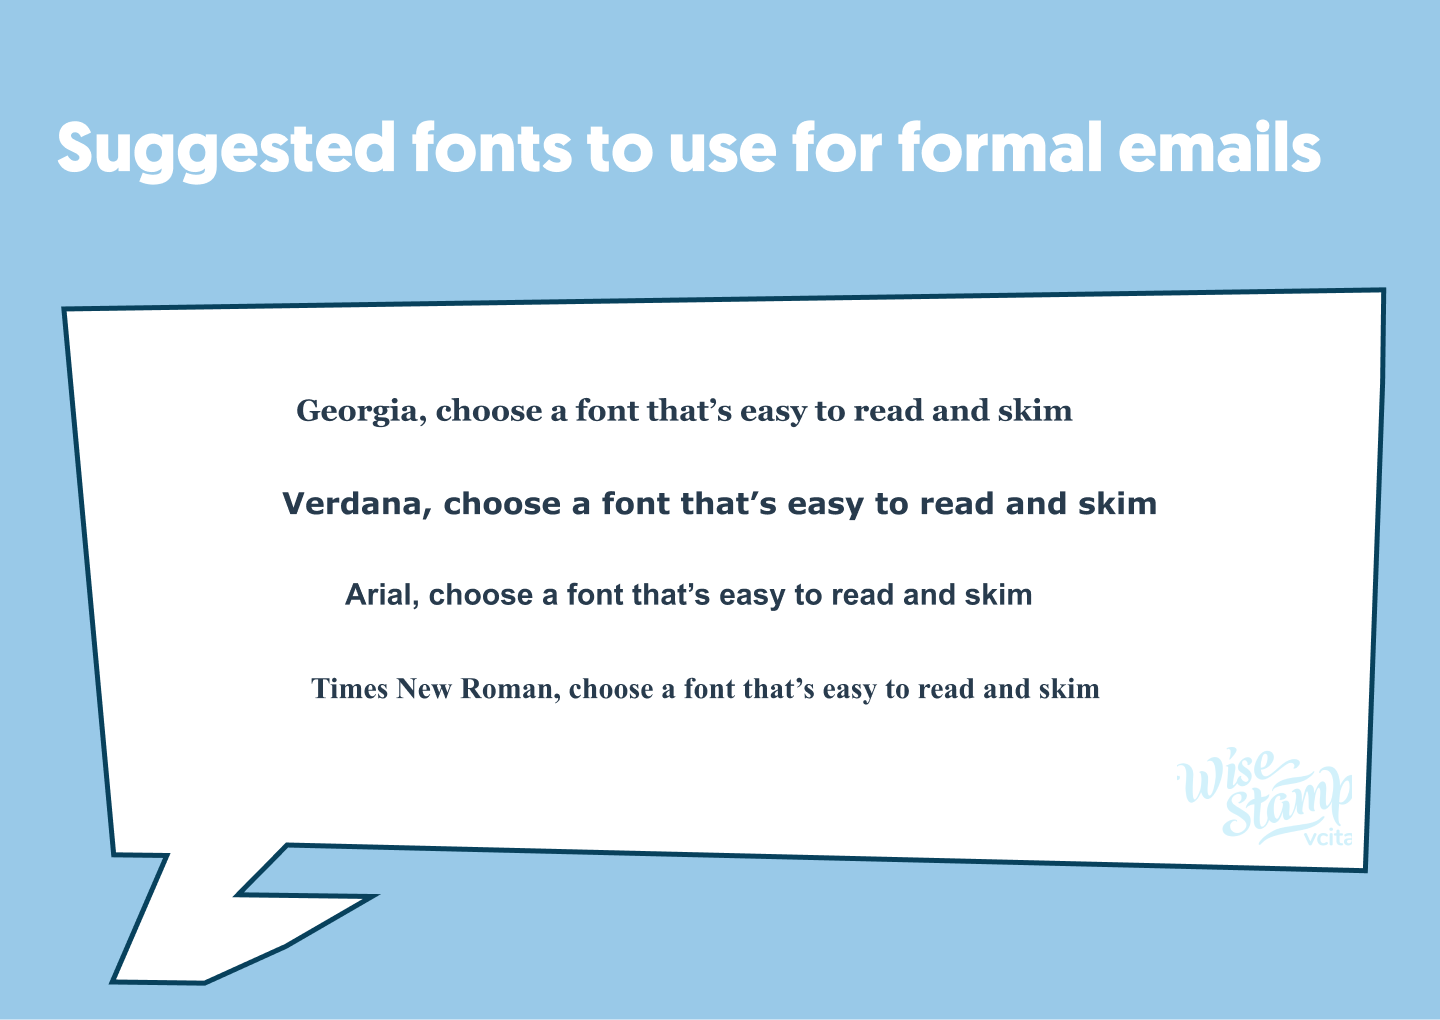 How to Write a Formal Email: Tips and Examples